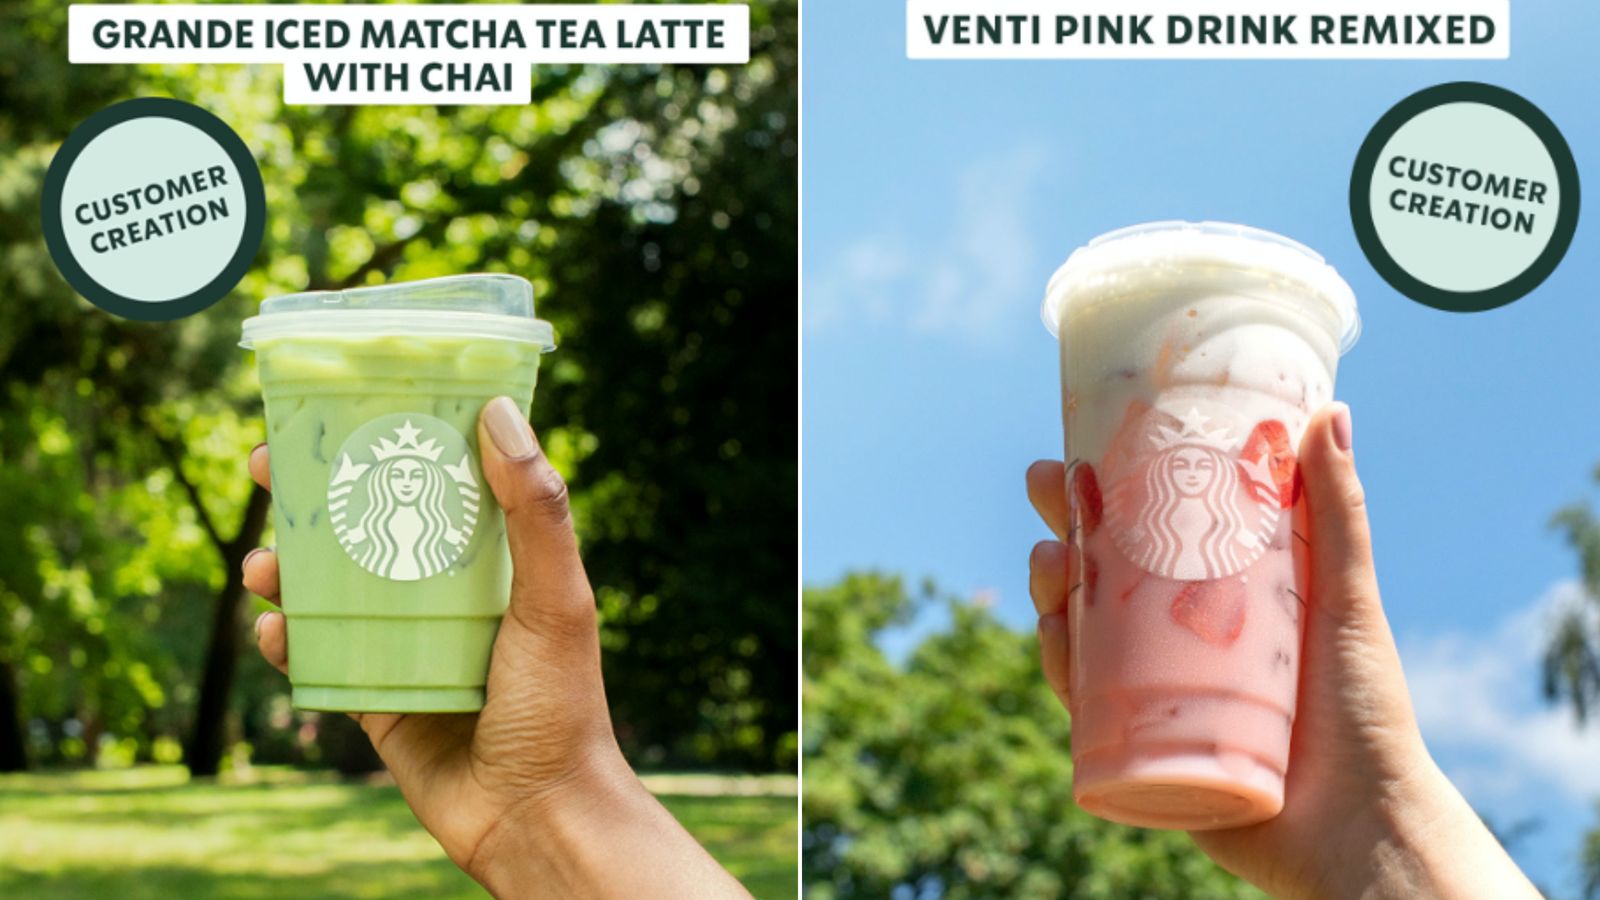 How To Order The TikTok Pink Matcha Drink From Starbucks